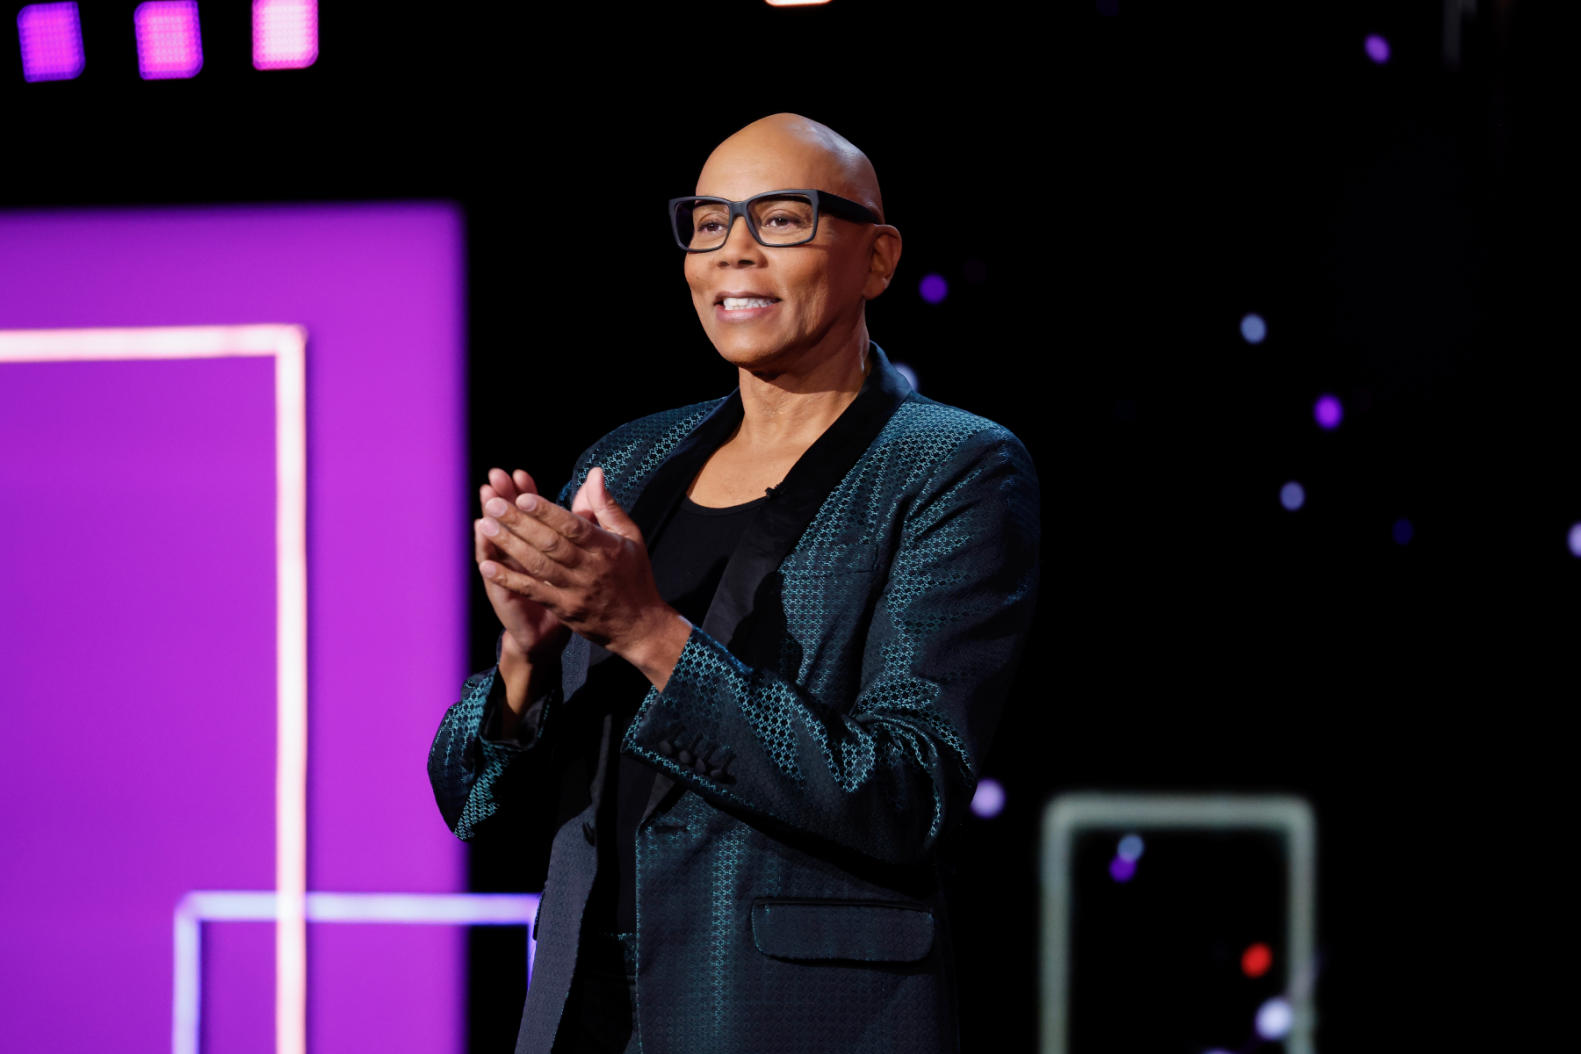 RuPaul’s Memoir ‘The House of Hidden Meanings’: Here’s what you may want to know 